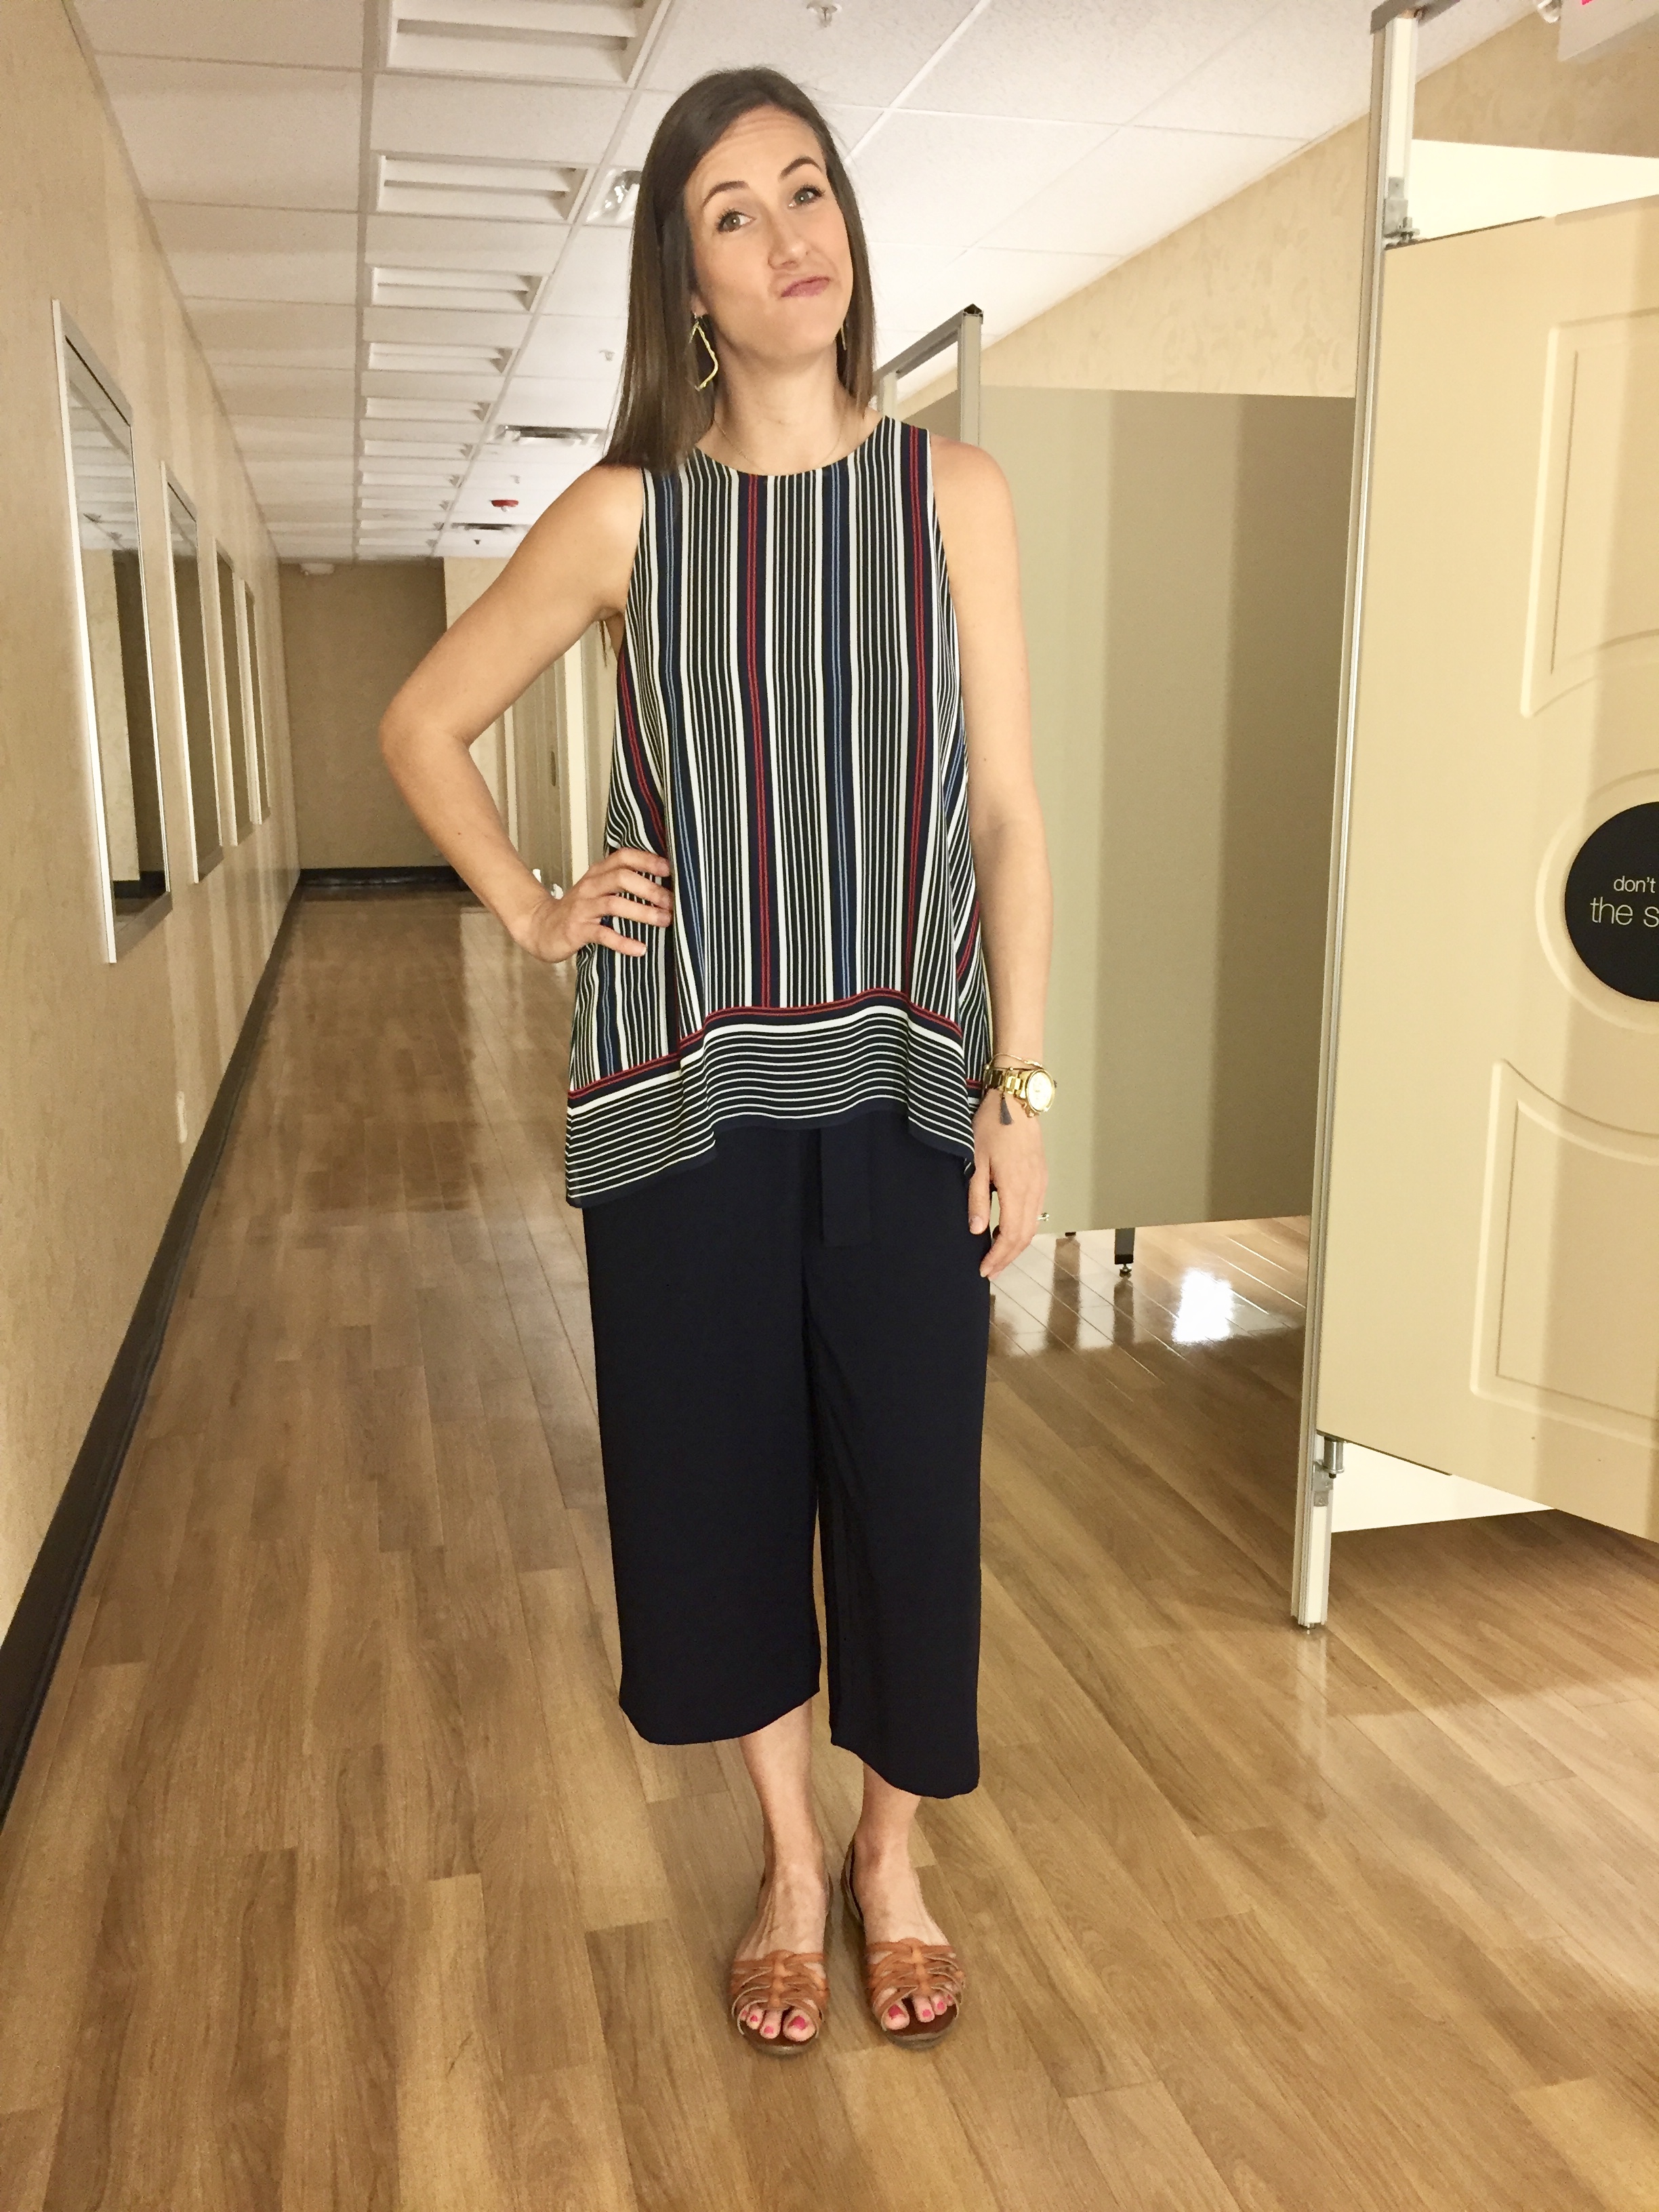 before, striped tank top, style session, needs work, method39, style advice, wardrobe stylist